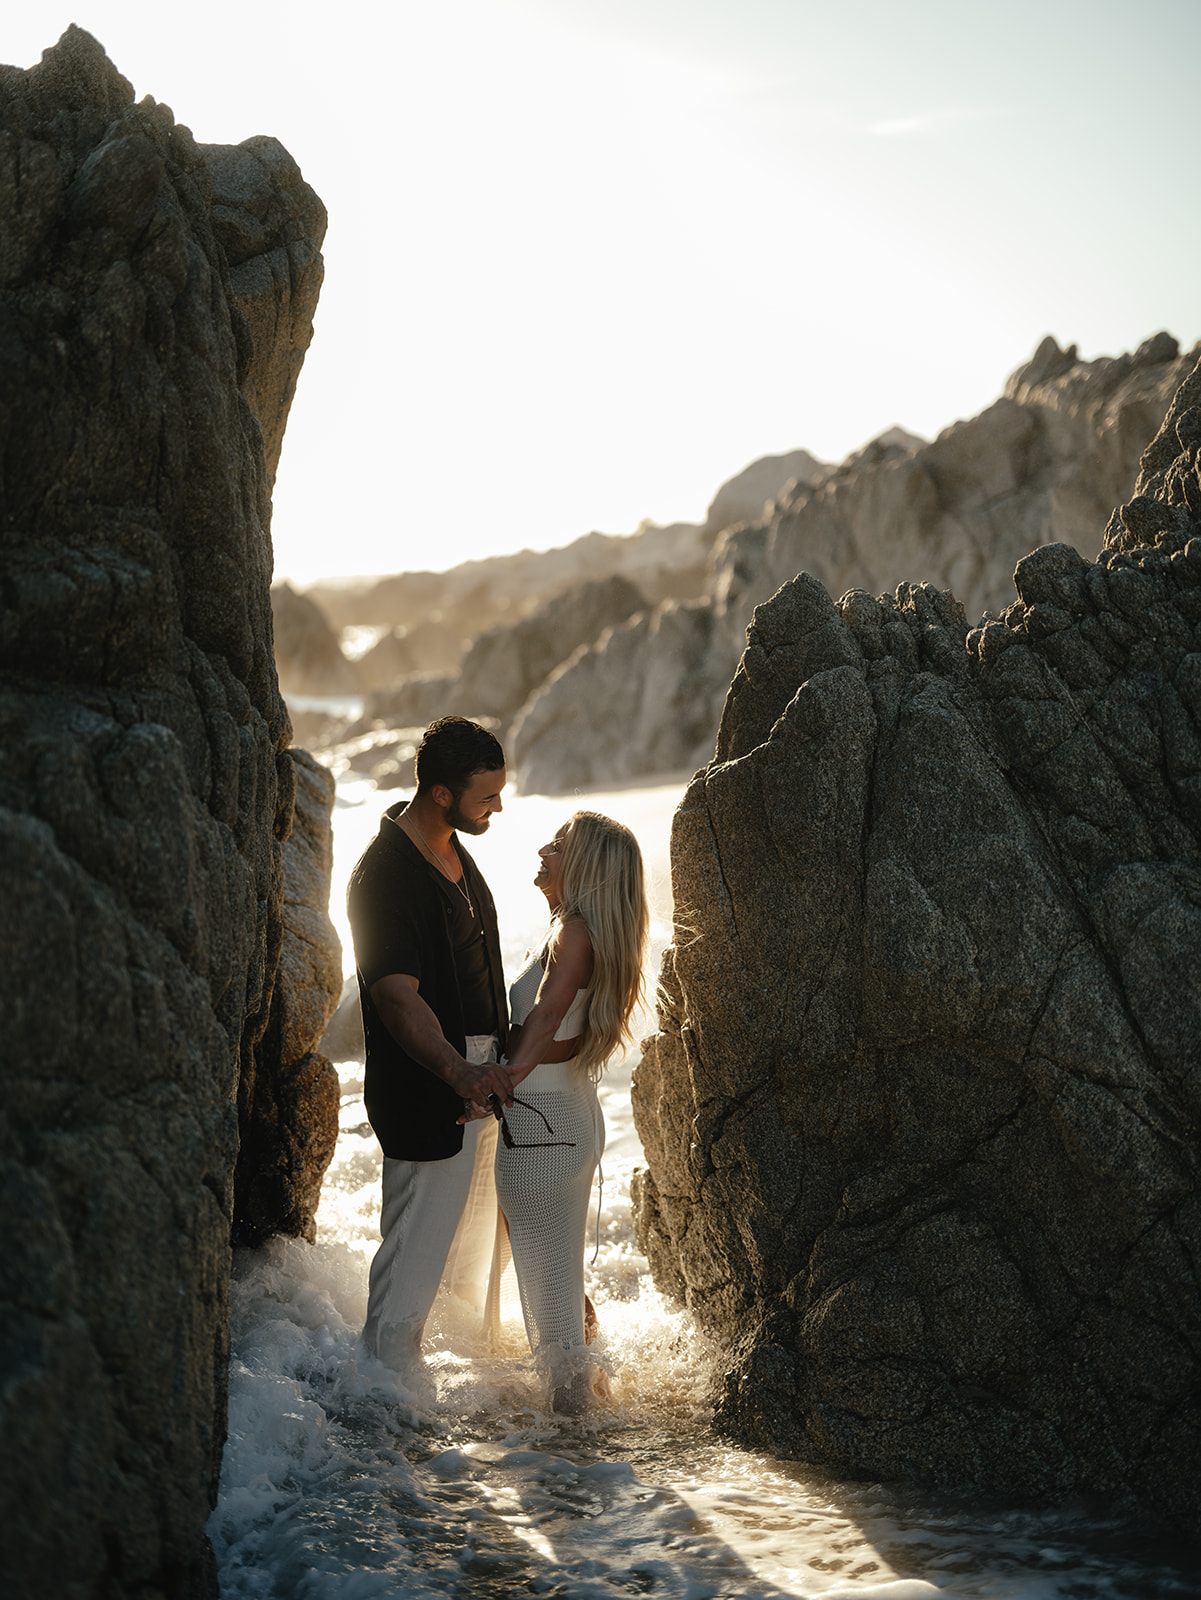 couple's photos on rock bluffs while tide comes in mexico